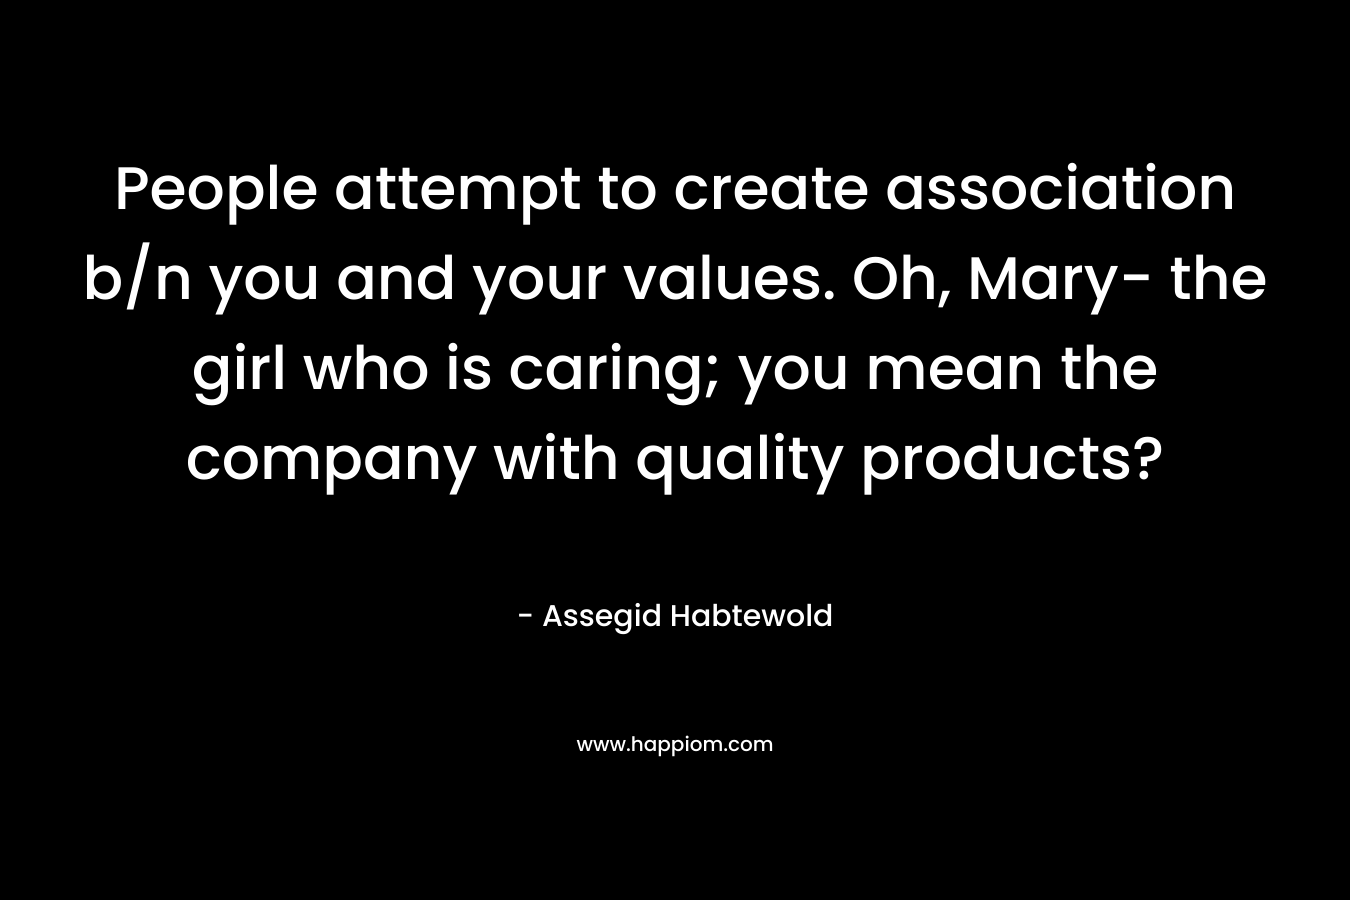 People attempt to create association b/n you and your values. Oh, Mary- the girl who is caring; you mean the company with quality products? – Assegid Habtewold